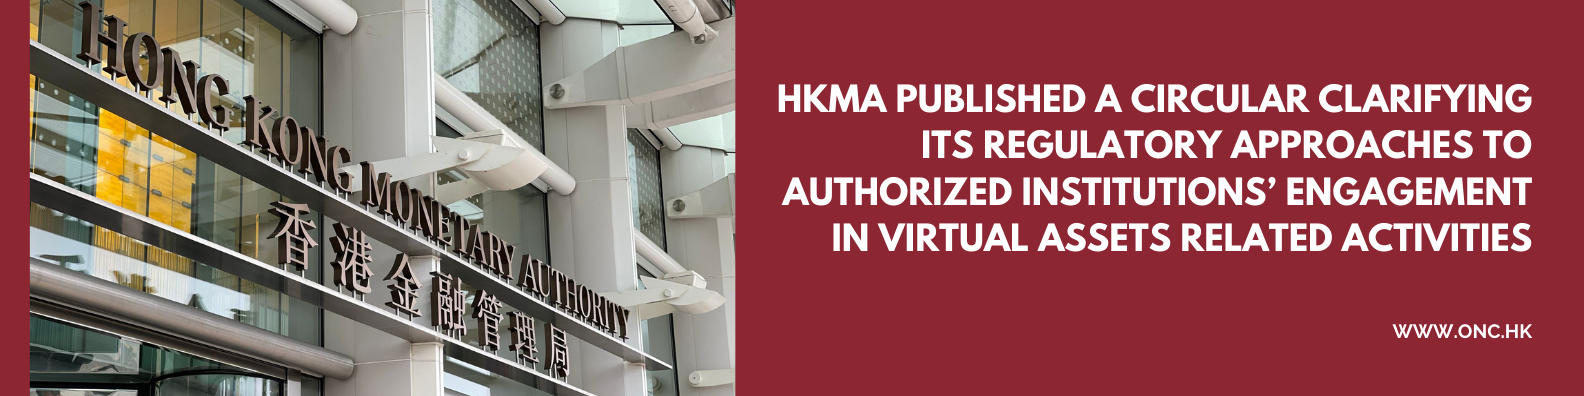 HKMA published a circular clarifying its regulatory approaches to authorized institutions’ engagement in virtual assets related activities